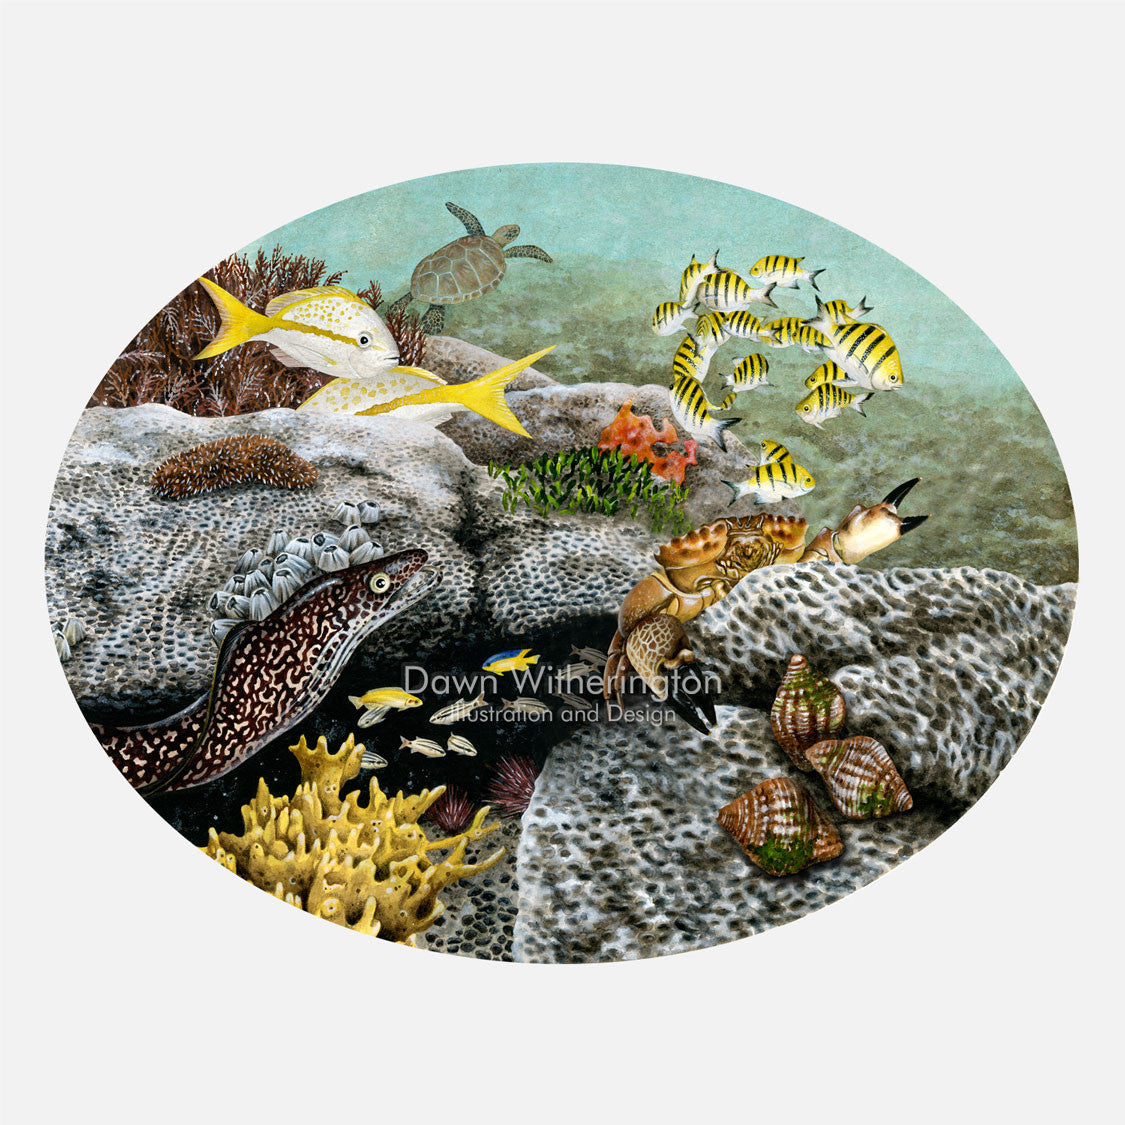 This illustration is of animals associated with wormrock (made by Sabellariid worms). The art features a stone crab, an eel, rock snails, several fish, and other critters living around wormrock.